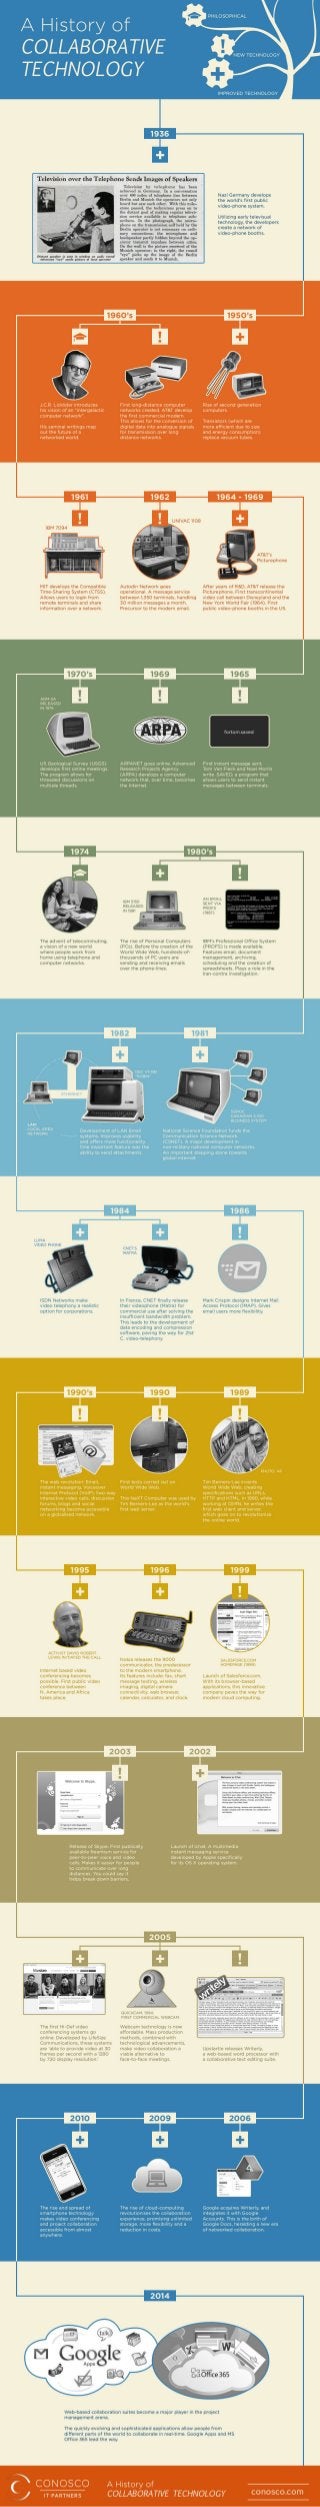 Infographic - The history of collaborative technology